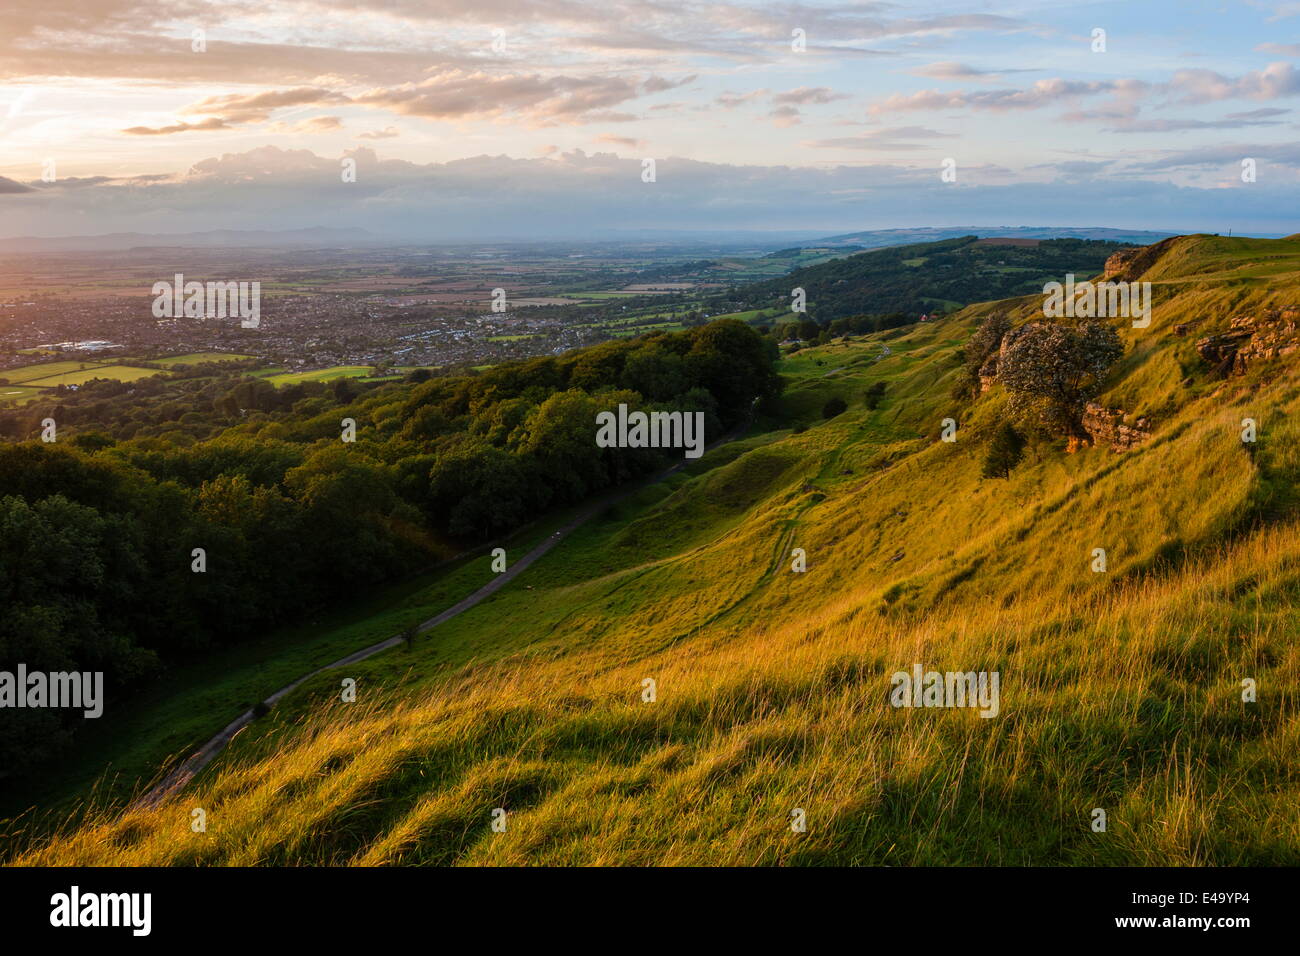 Cleve Hill, part of the Cotswold Hill, Cheltenham, The Cotswolds, Gloucestershire, England, United Kingdom, Europe Stock Photo